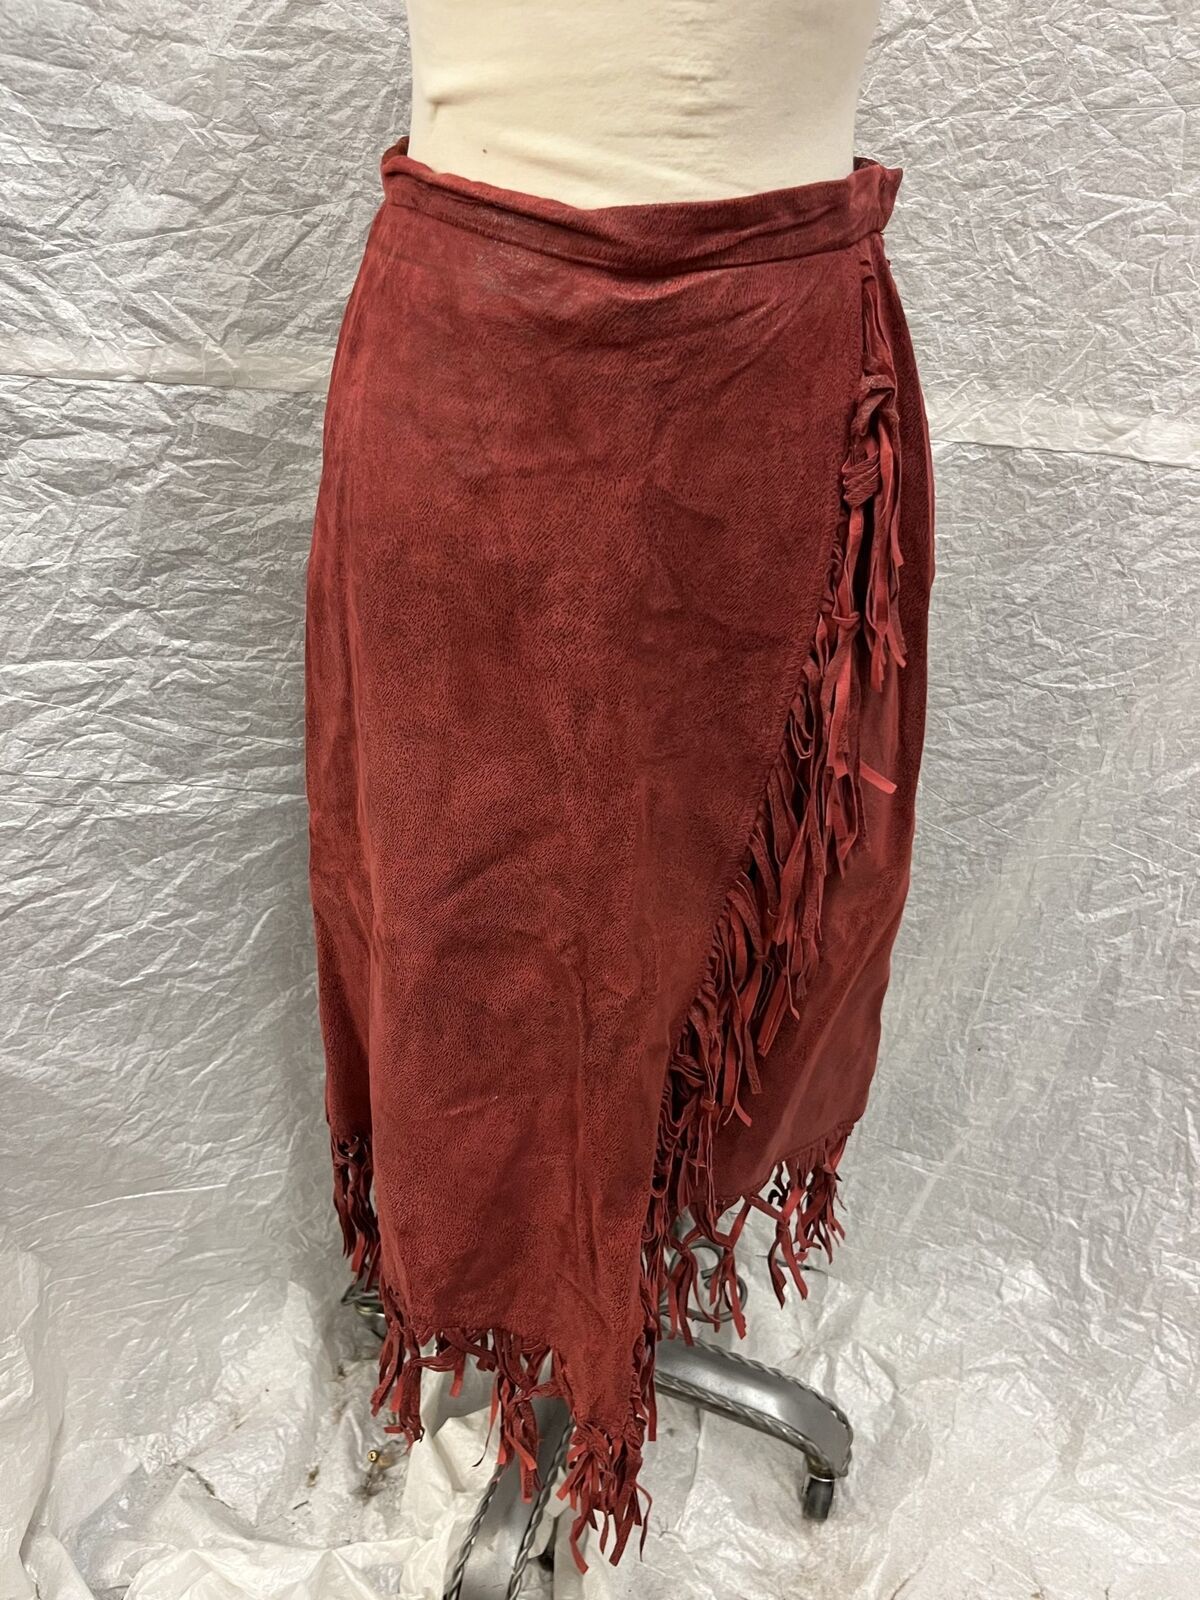 Primary image for Terry Lewis Classic Luxuries Red Leather Fringe Mid Length Skirt Women's Size 4